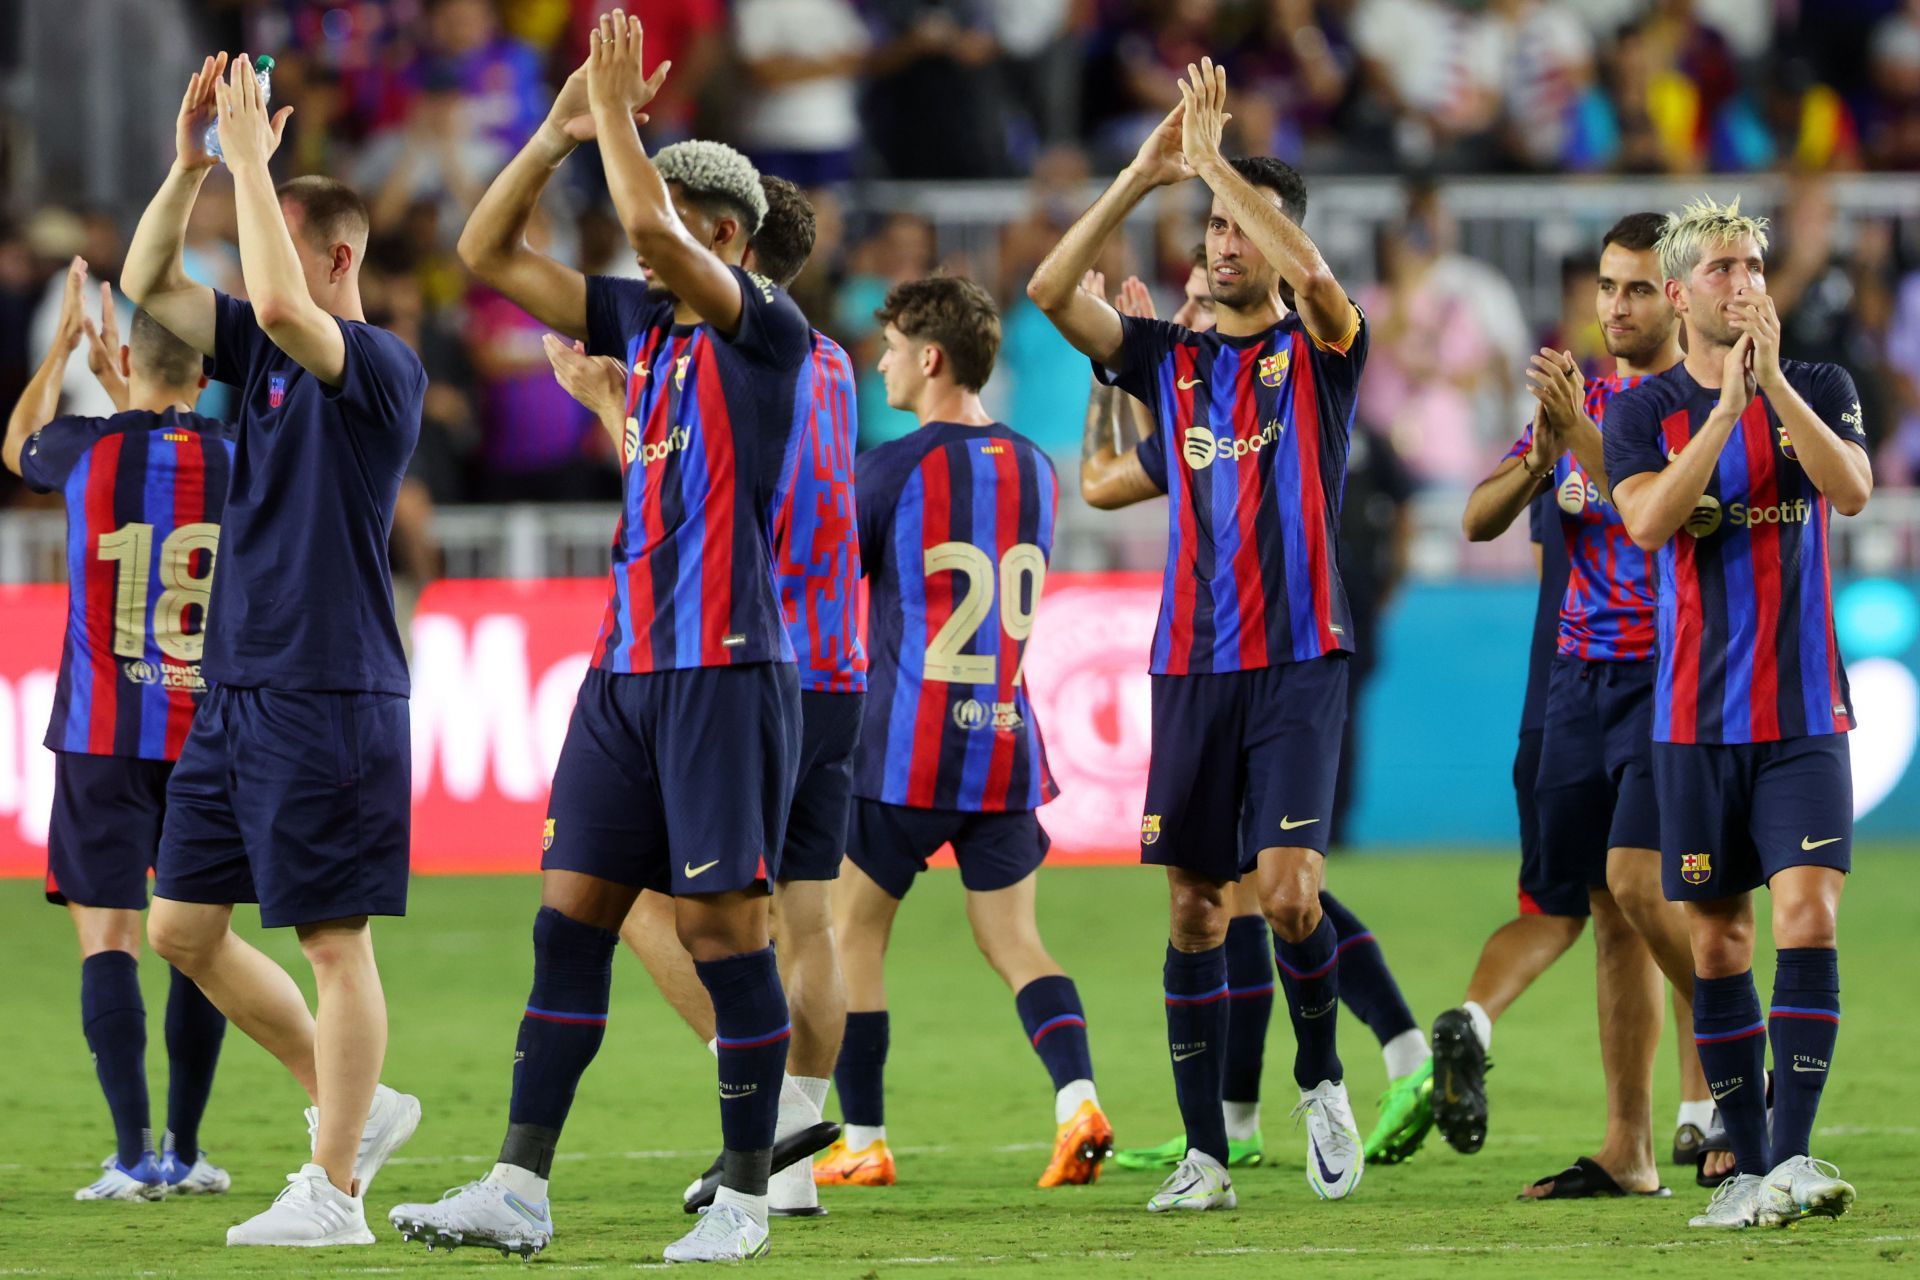 New York Red Bulls take on Barcelona this weekend